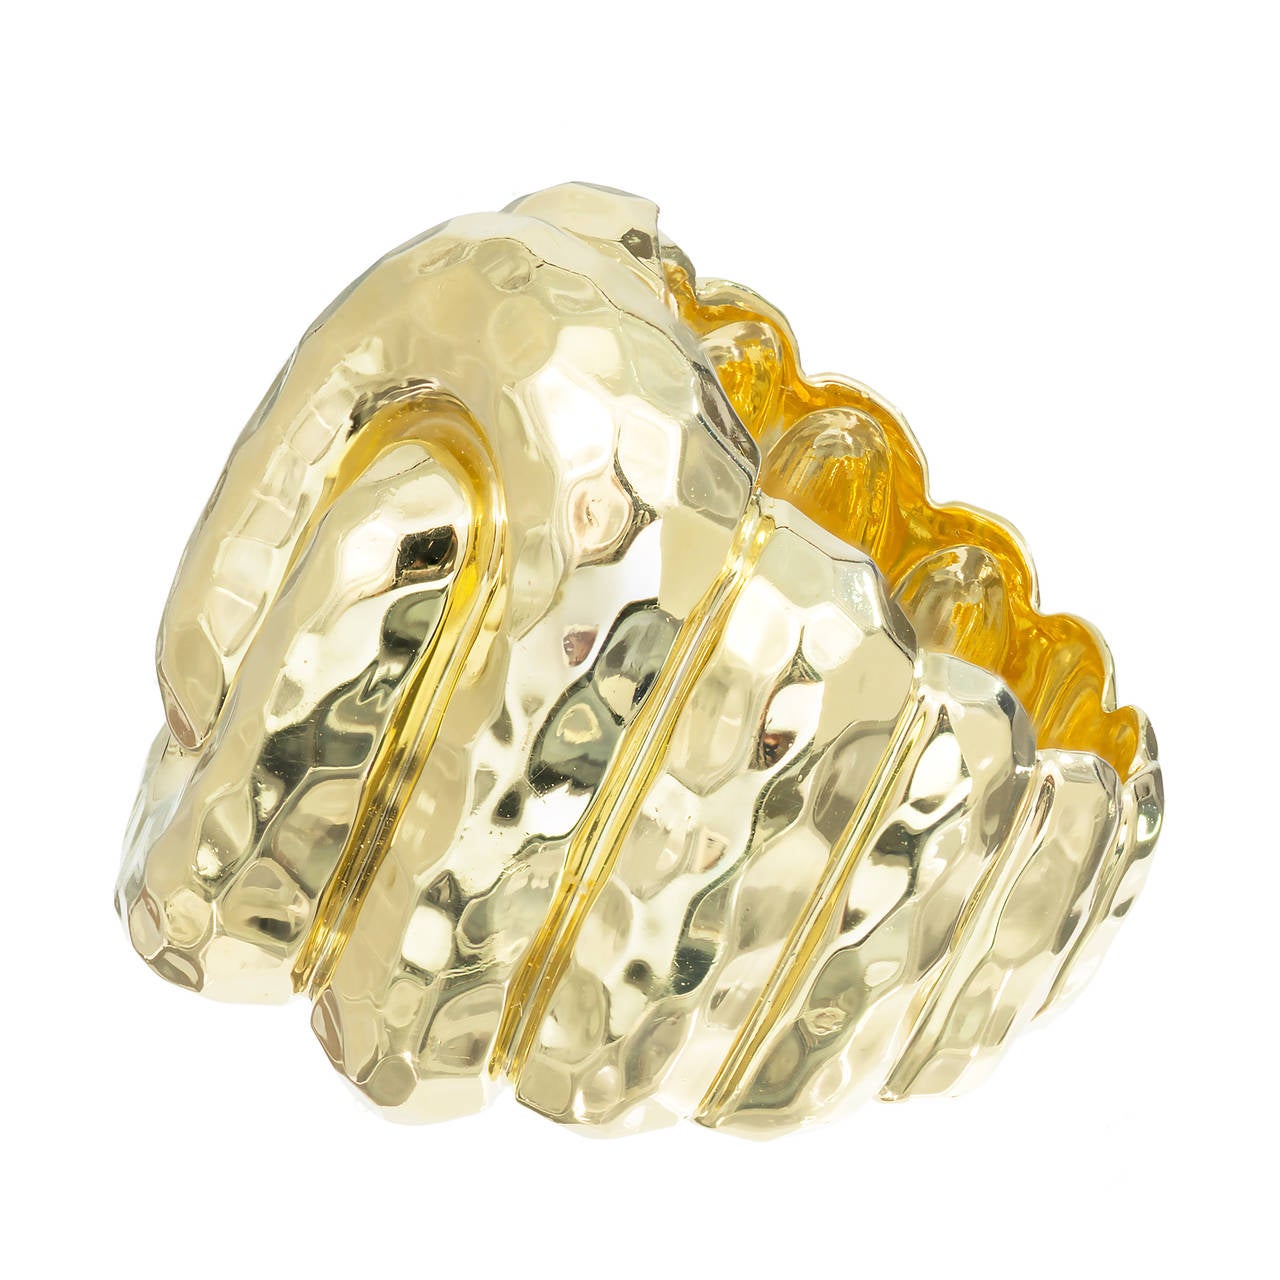 Classic 1990 Henry Dunay hammered swirl dome ring in solid 18k yellow gold.

18k yellow gold
18.6 grams
Tested: 18k
Stamped: 18k 750
Hallmark: Dunay 197796
Width at top: 22.8mm
Height at top: 9mm
Width at Bottom: 7mm
Size 7 and sizeable